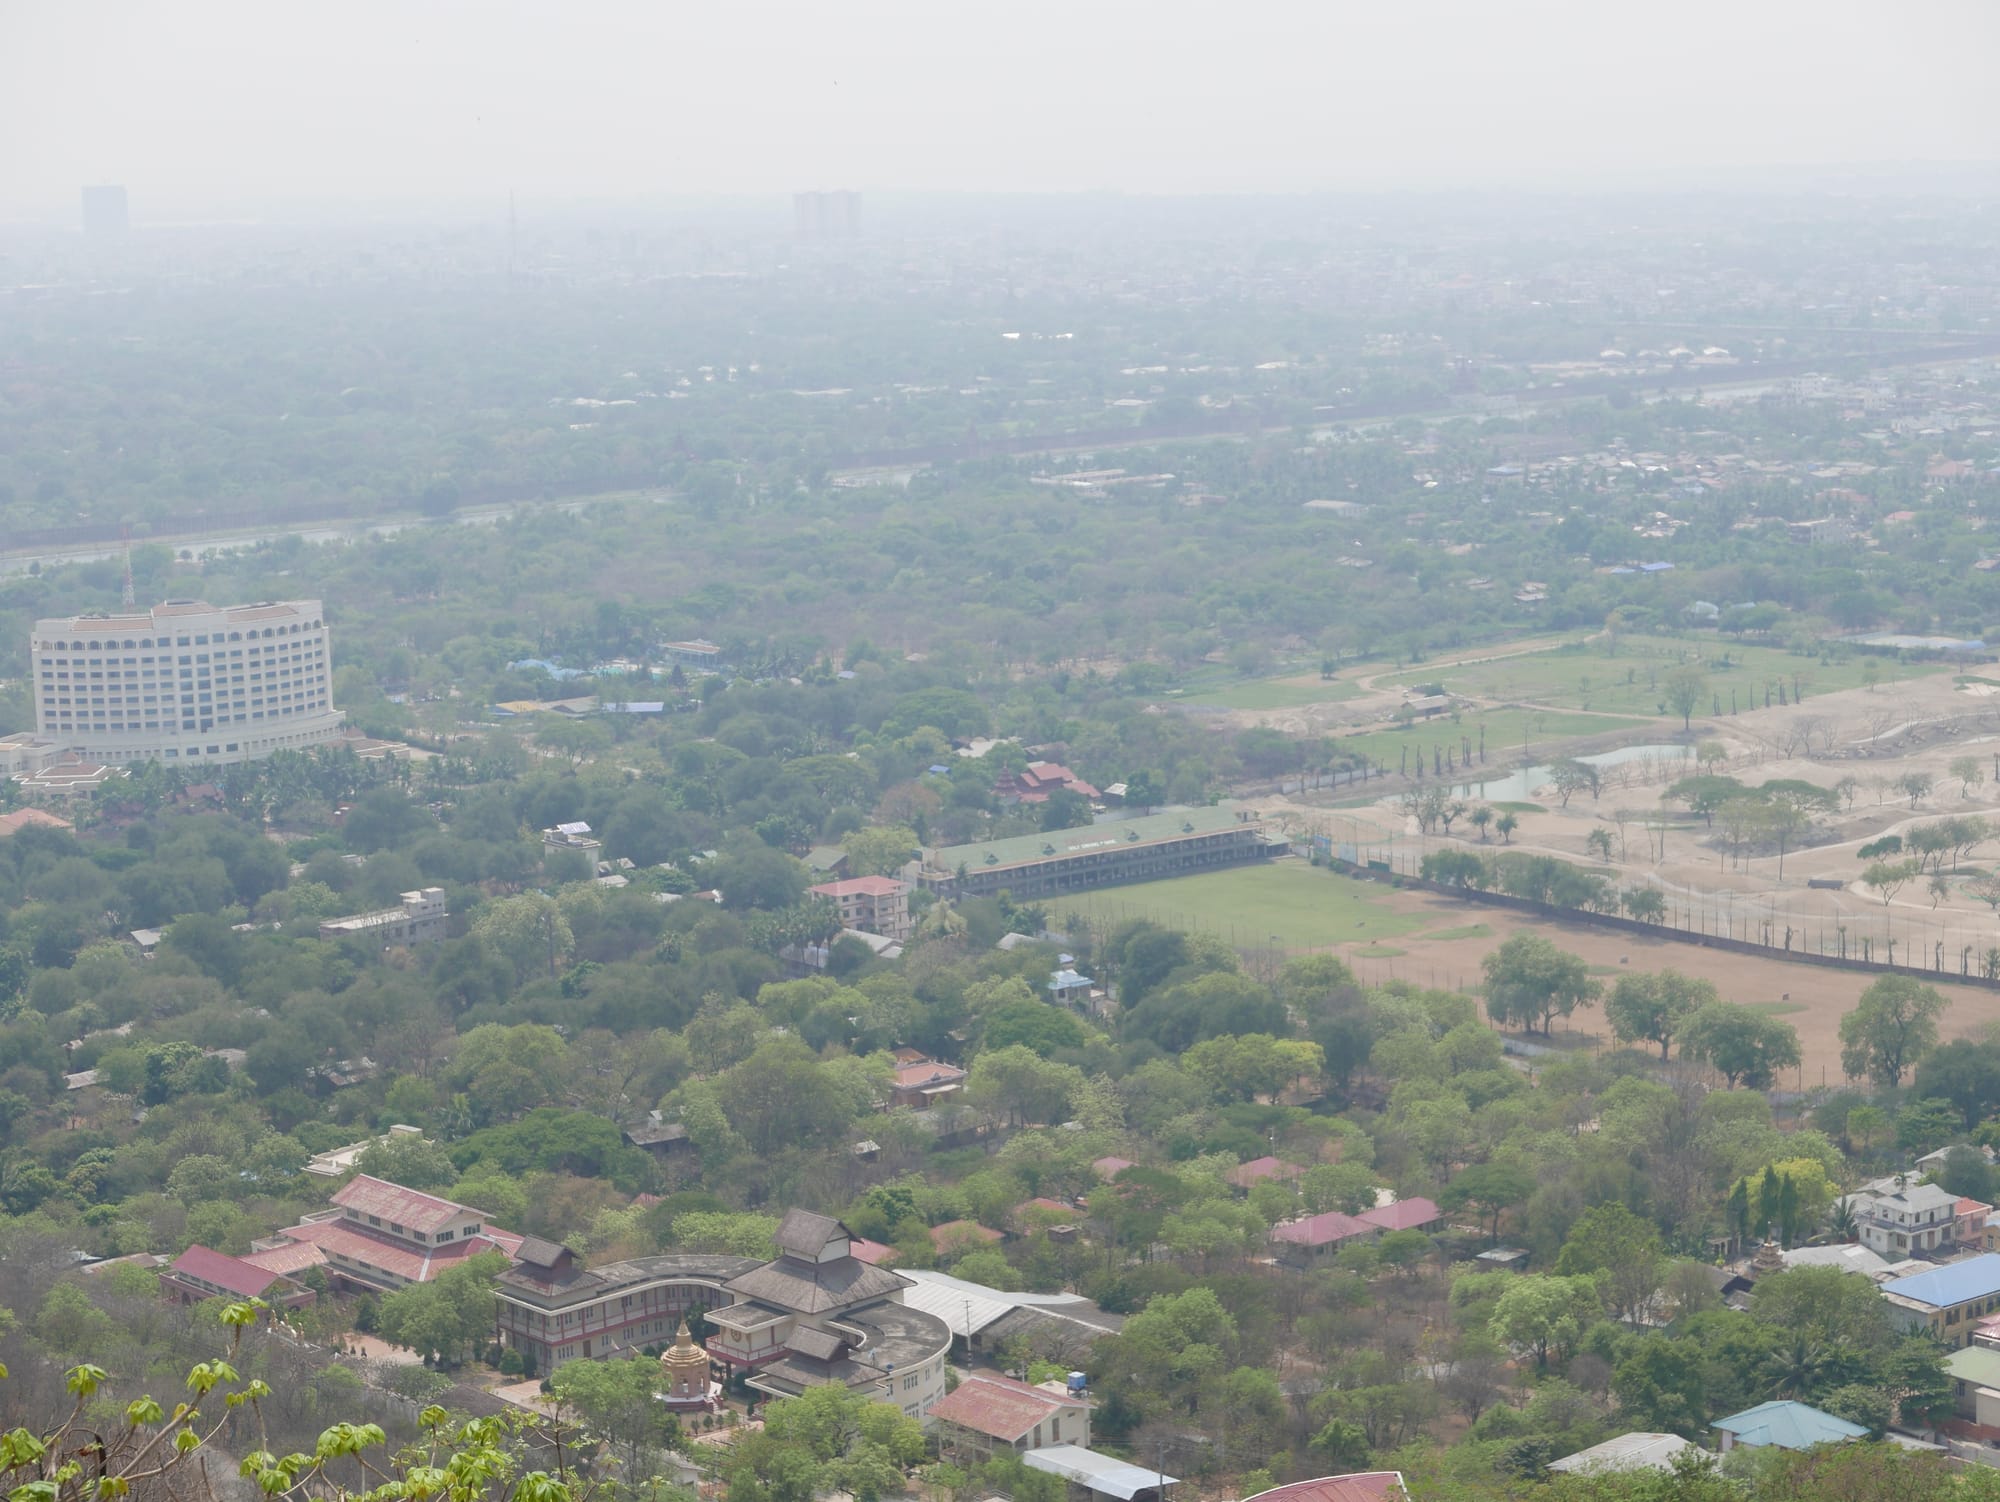 Photo by Author — the view from the top of Mandalay Hill